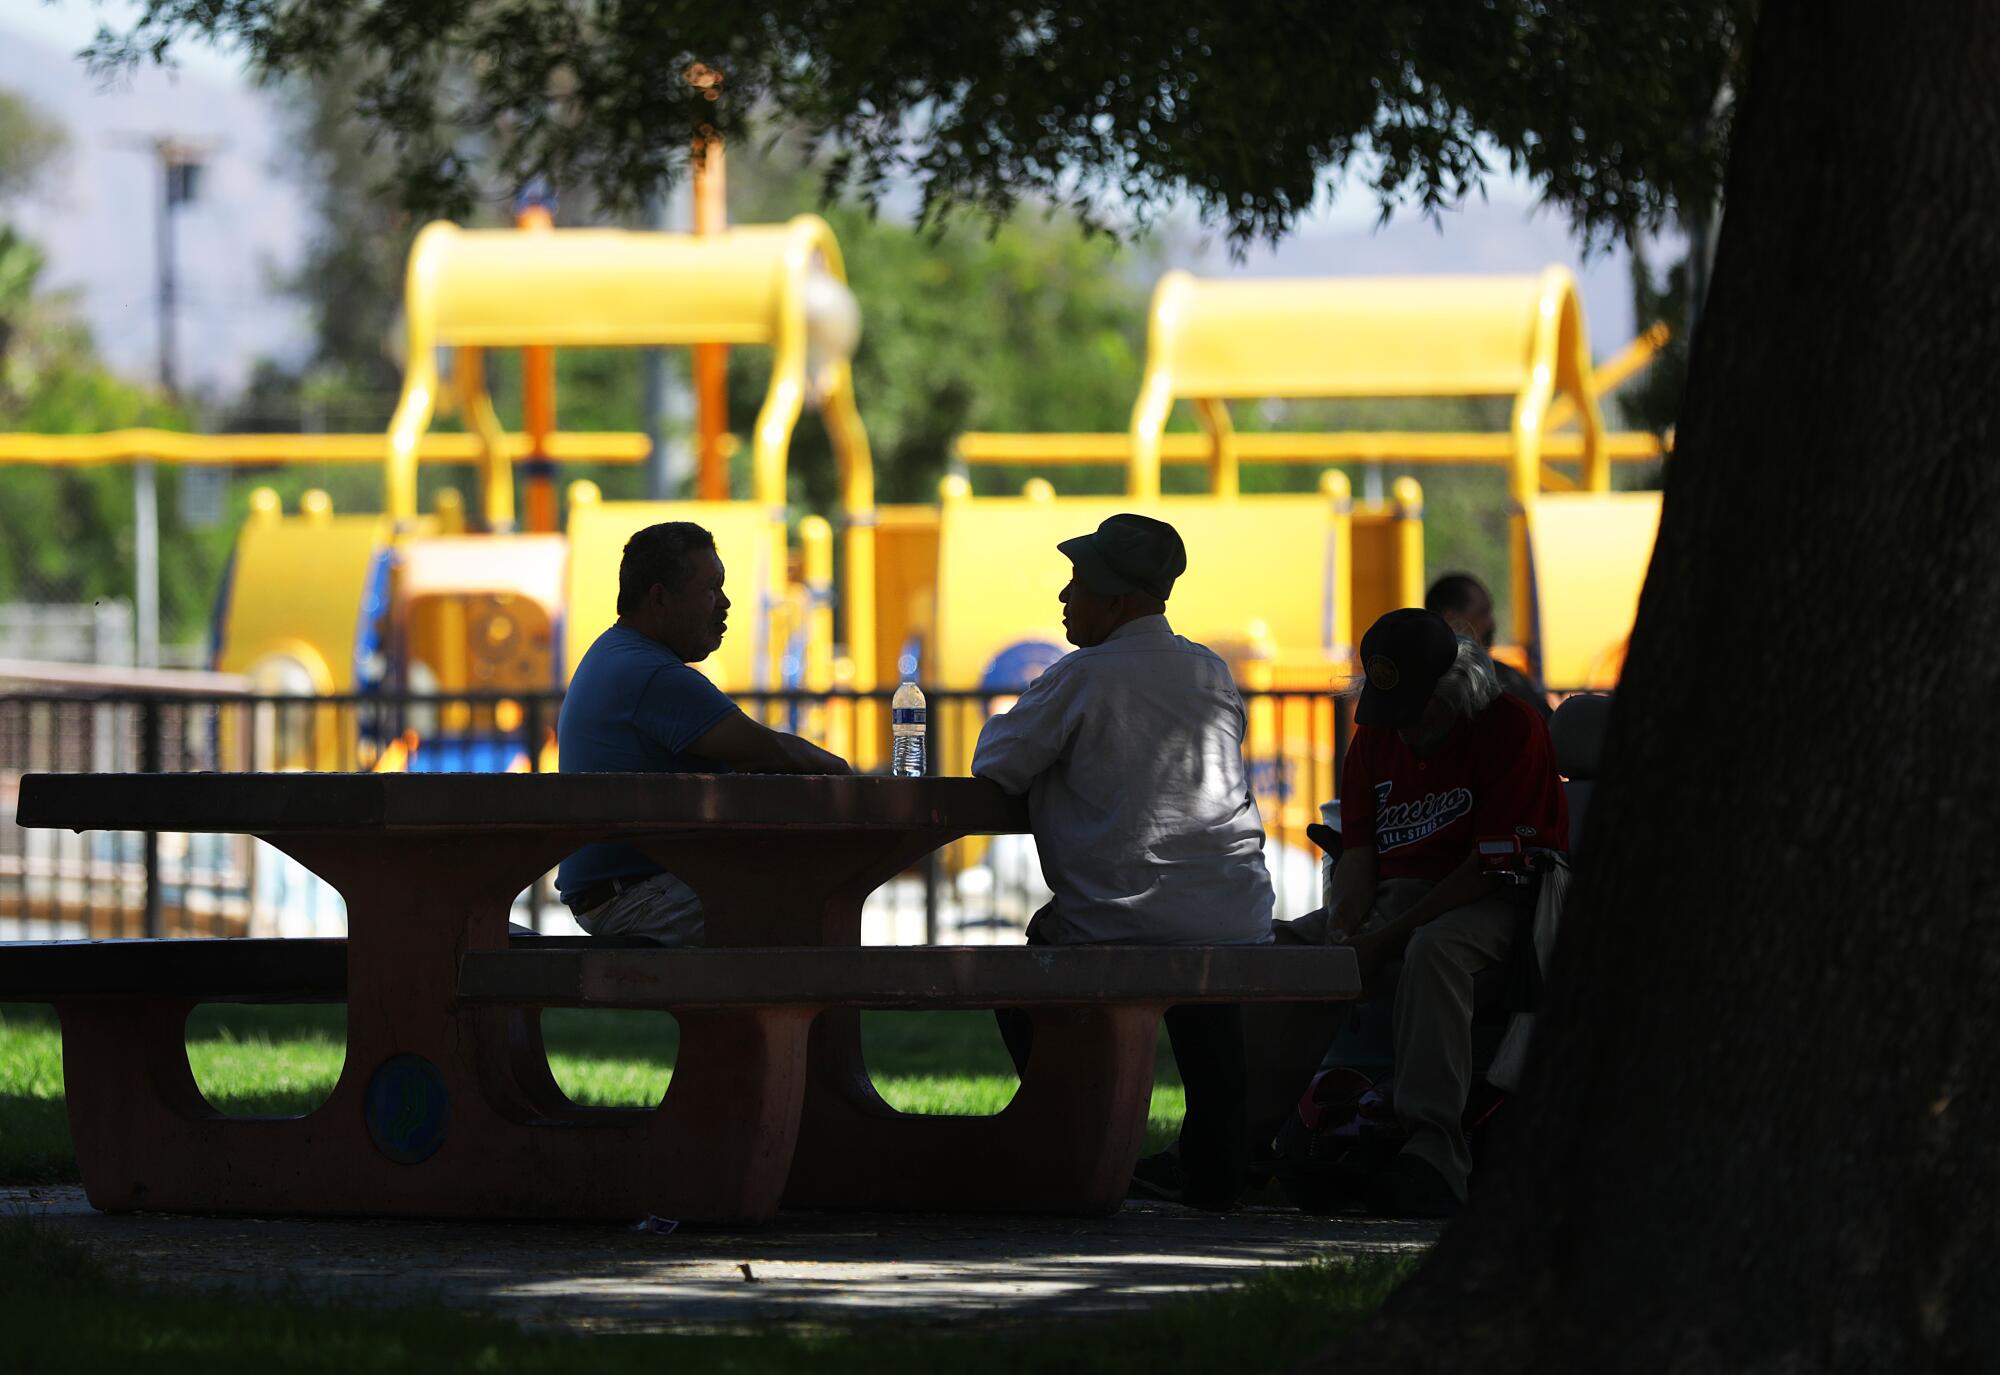 People stay cool in the shade at the Hubert H. Humphrey Recreation Center in Pacoima on Aug. 2.